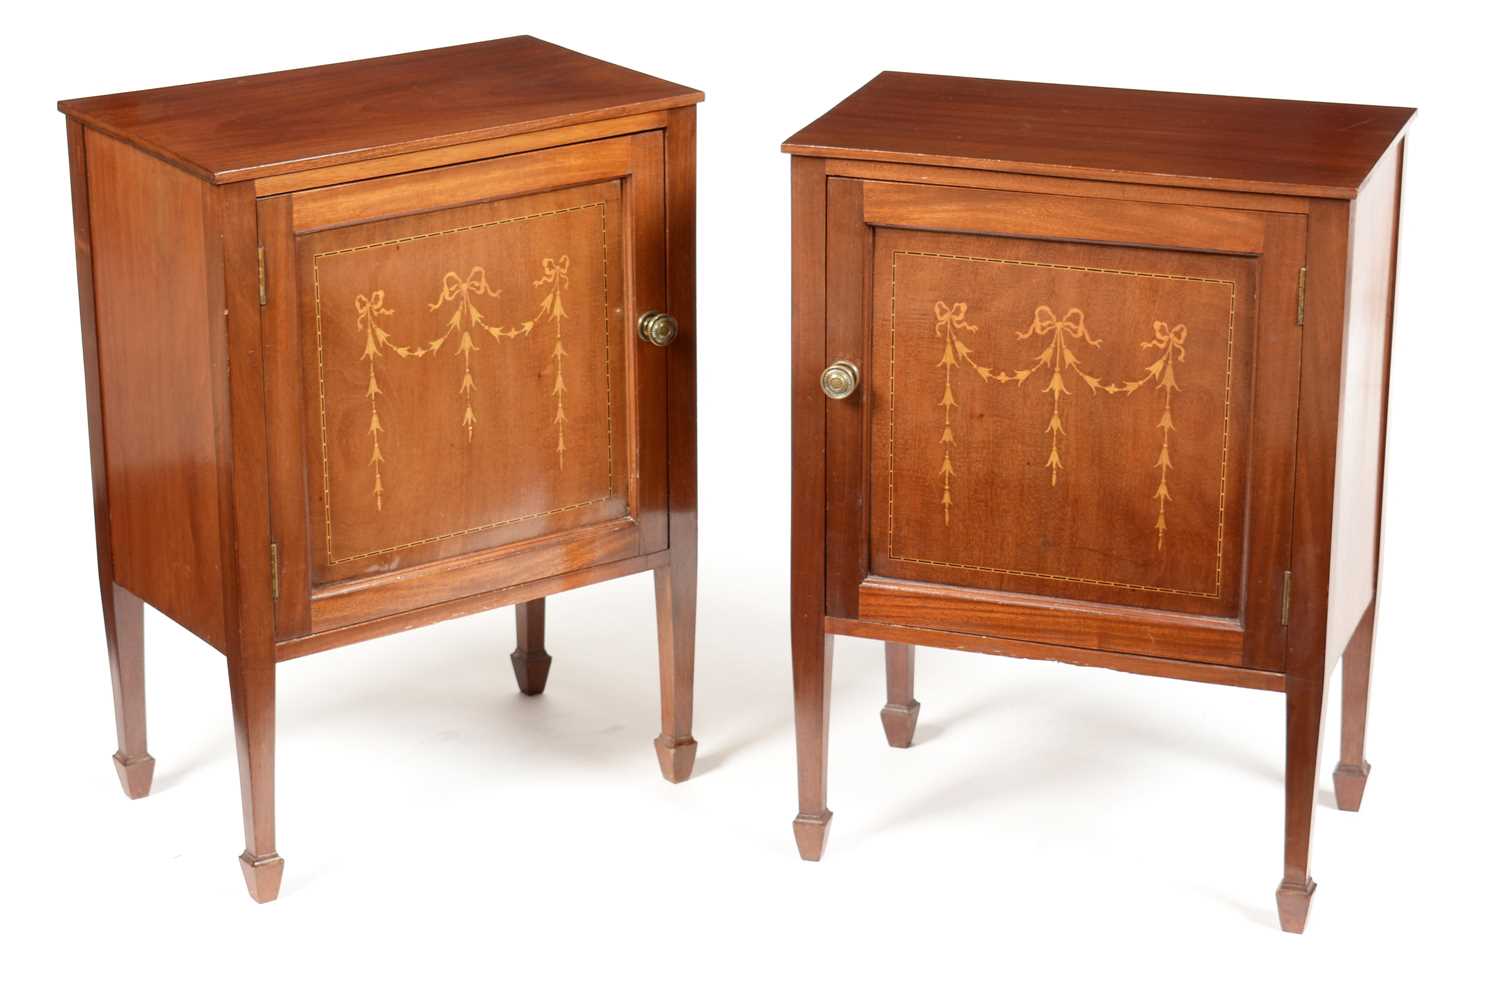 Lot 902 - Pair of Edwardian style bedside cabinets